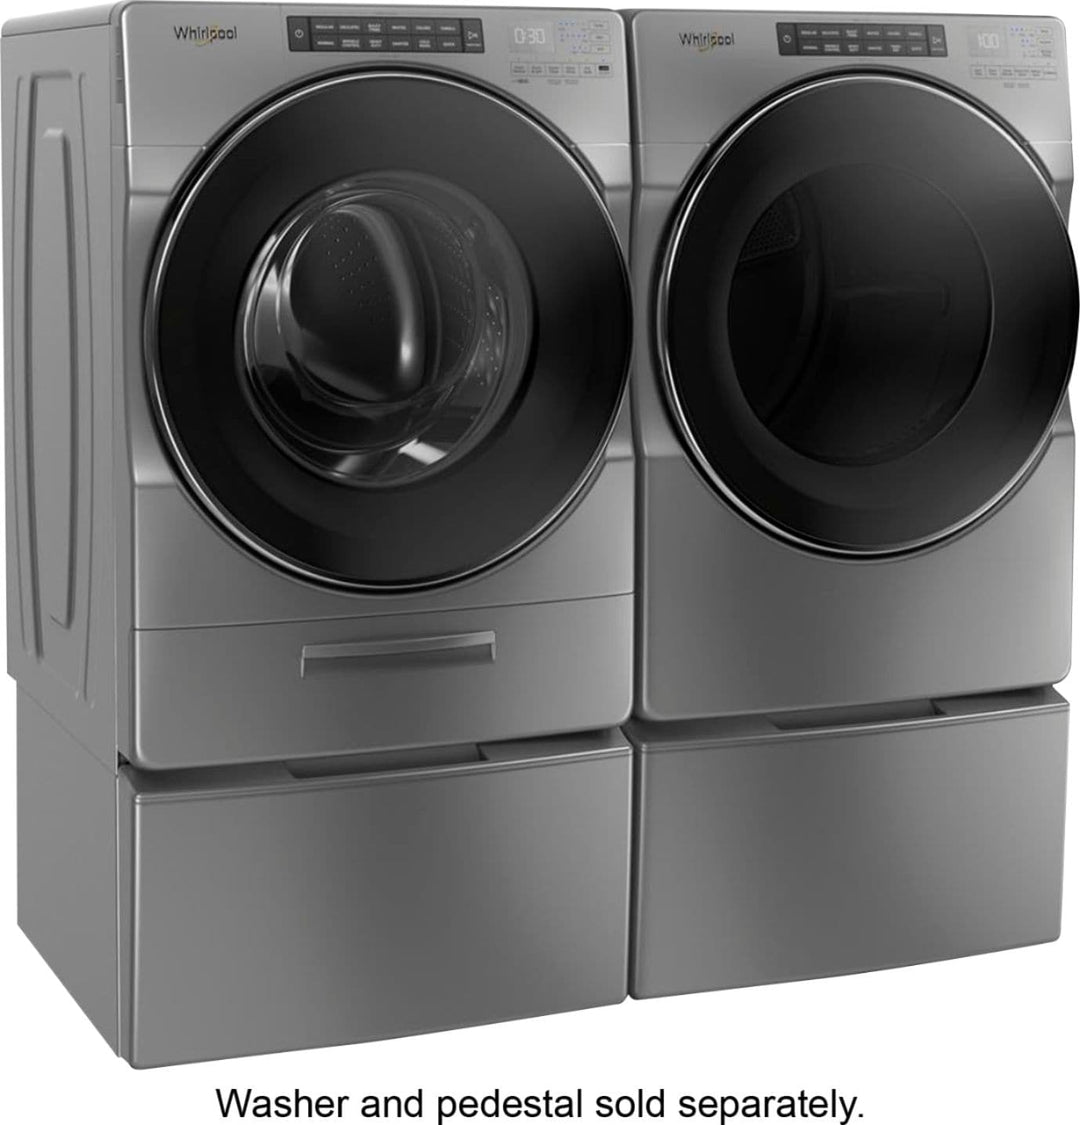 Whirlpool - 7.4 Cu. Ft. Stackable Electric Dryer with Steam and Wrinkle Shield Plus Option - Chrome shadow_6